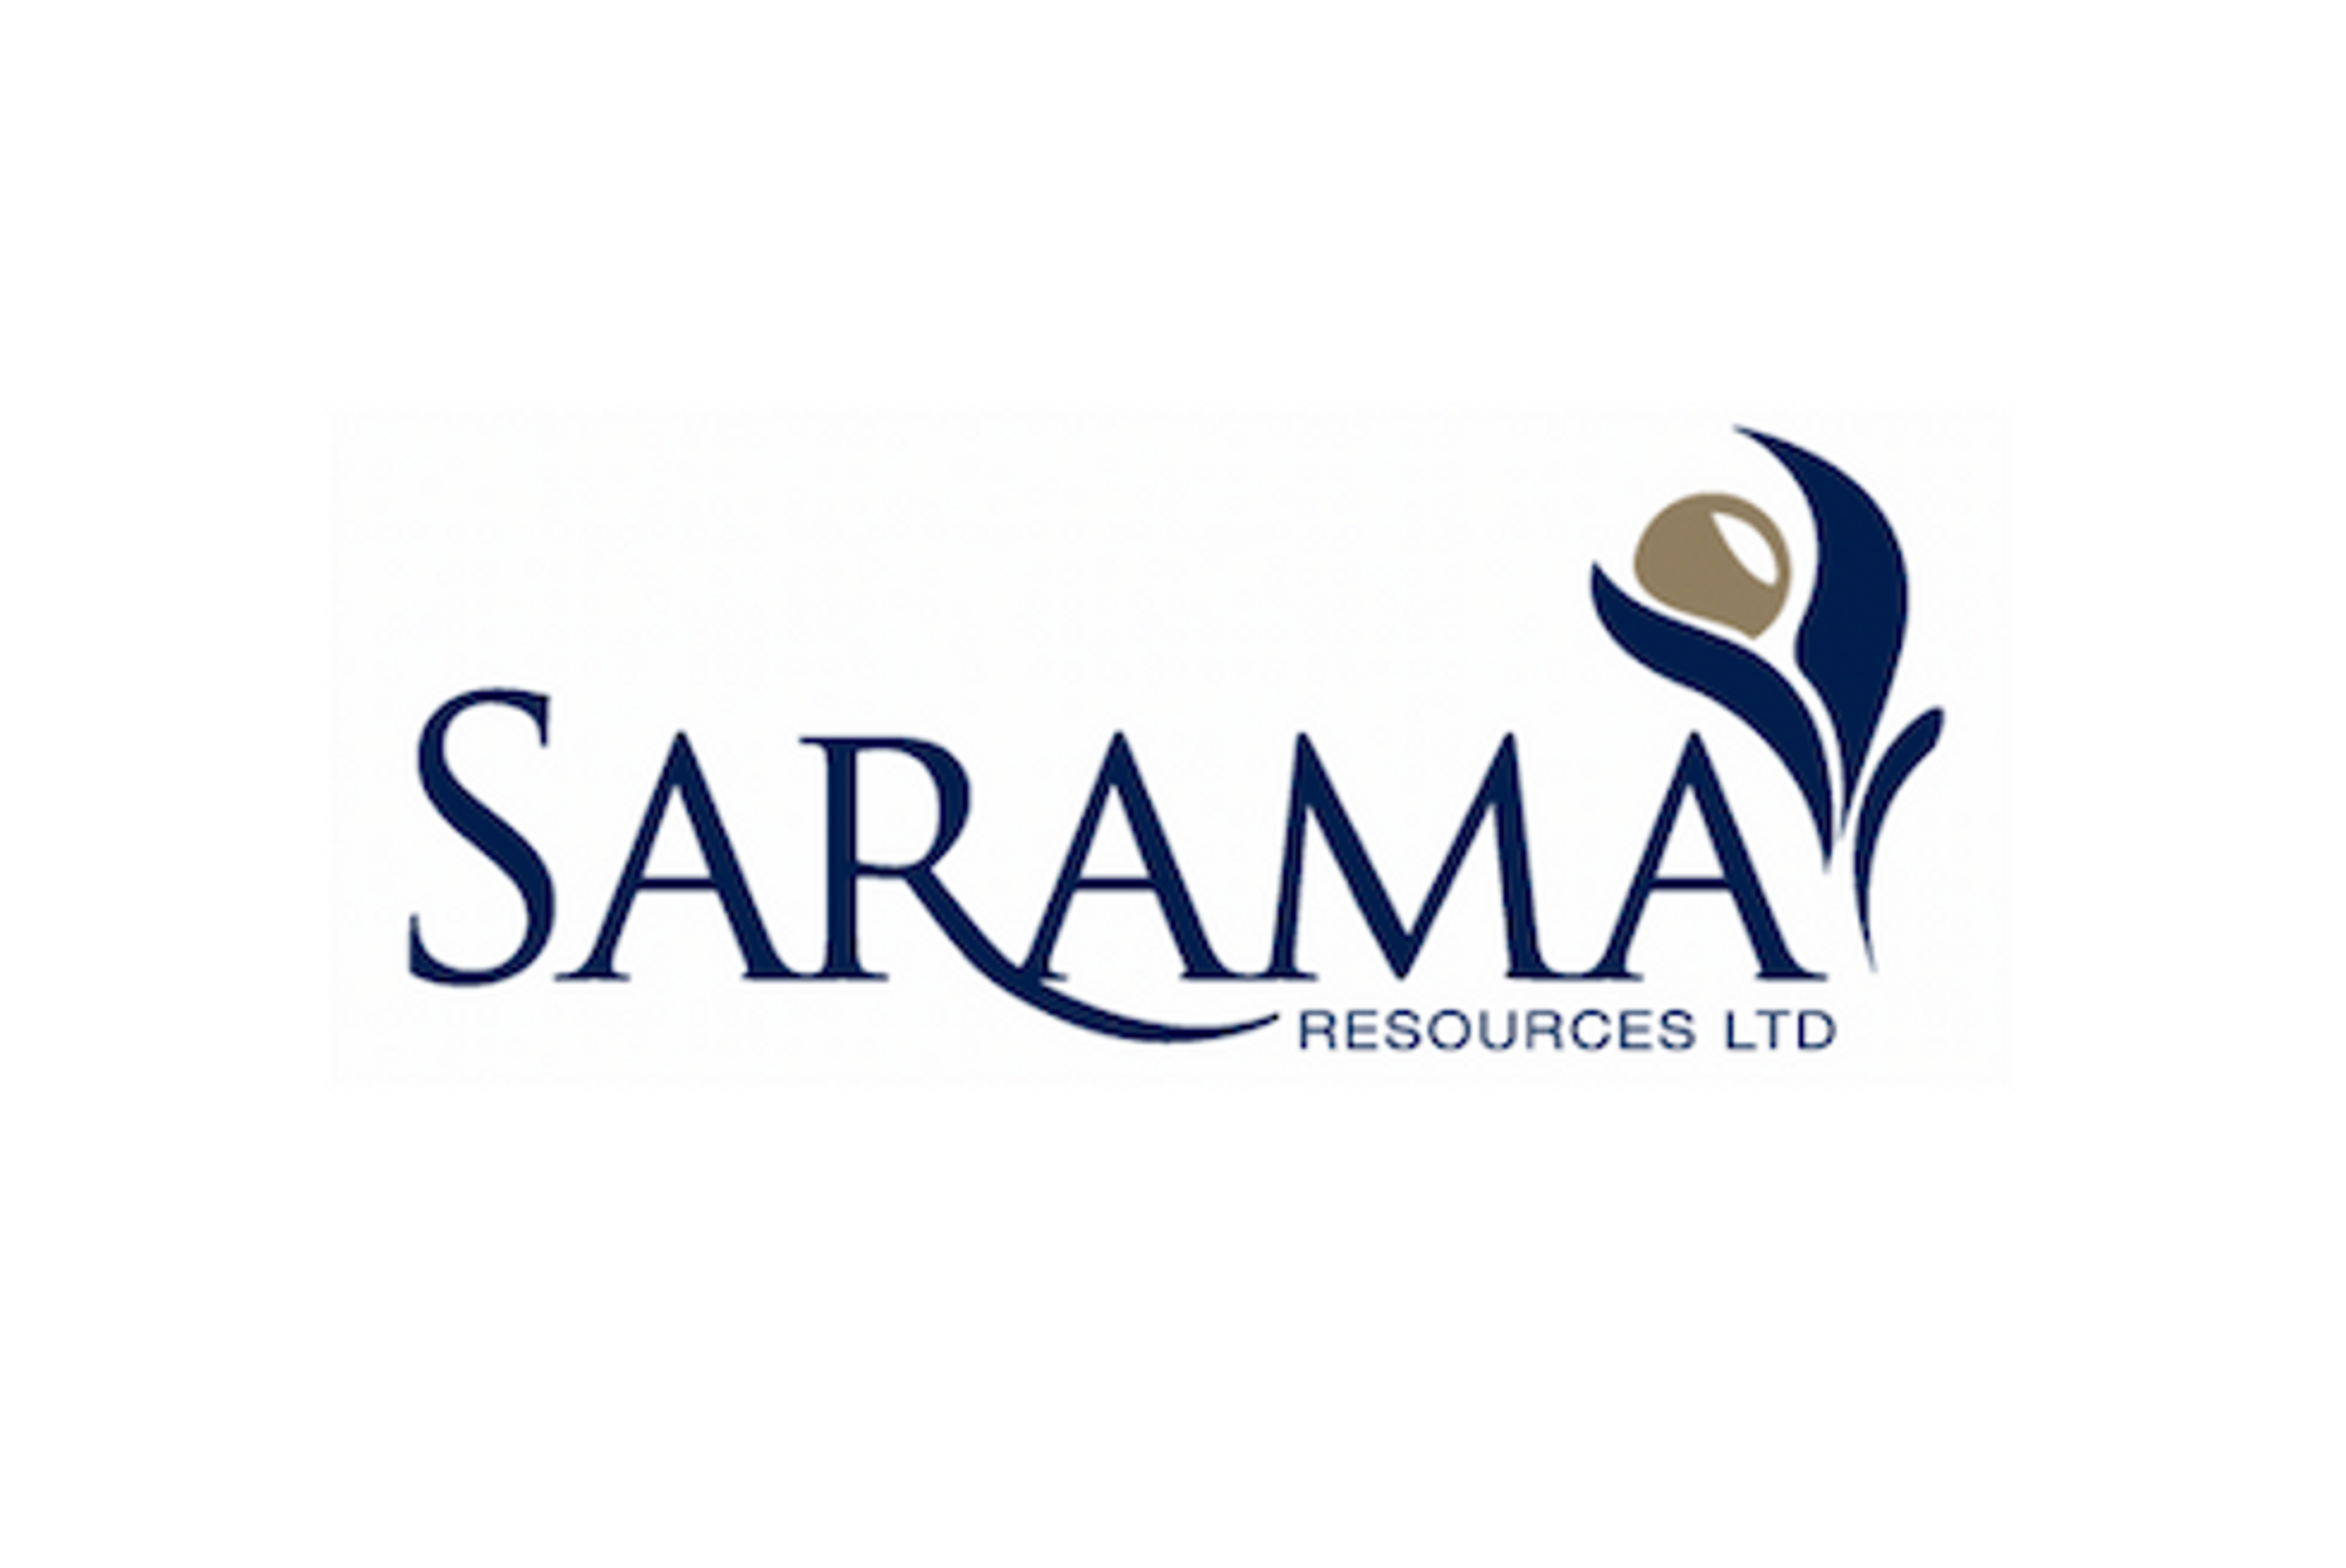 Sarama Resources Files Prospectus for Proposed Dual Listing on The Australian Securities Exchange